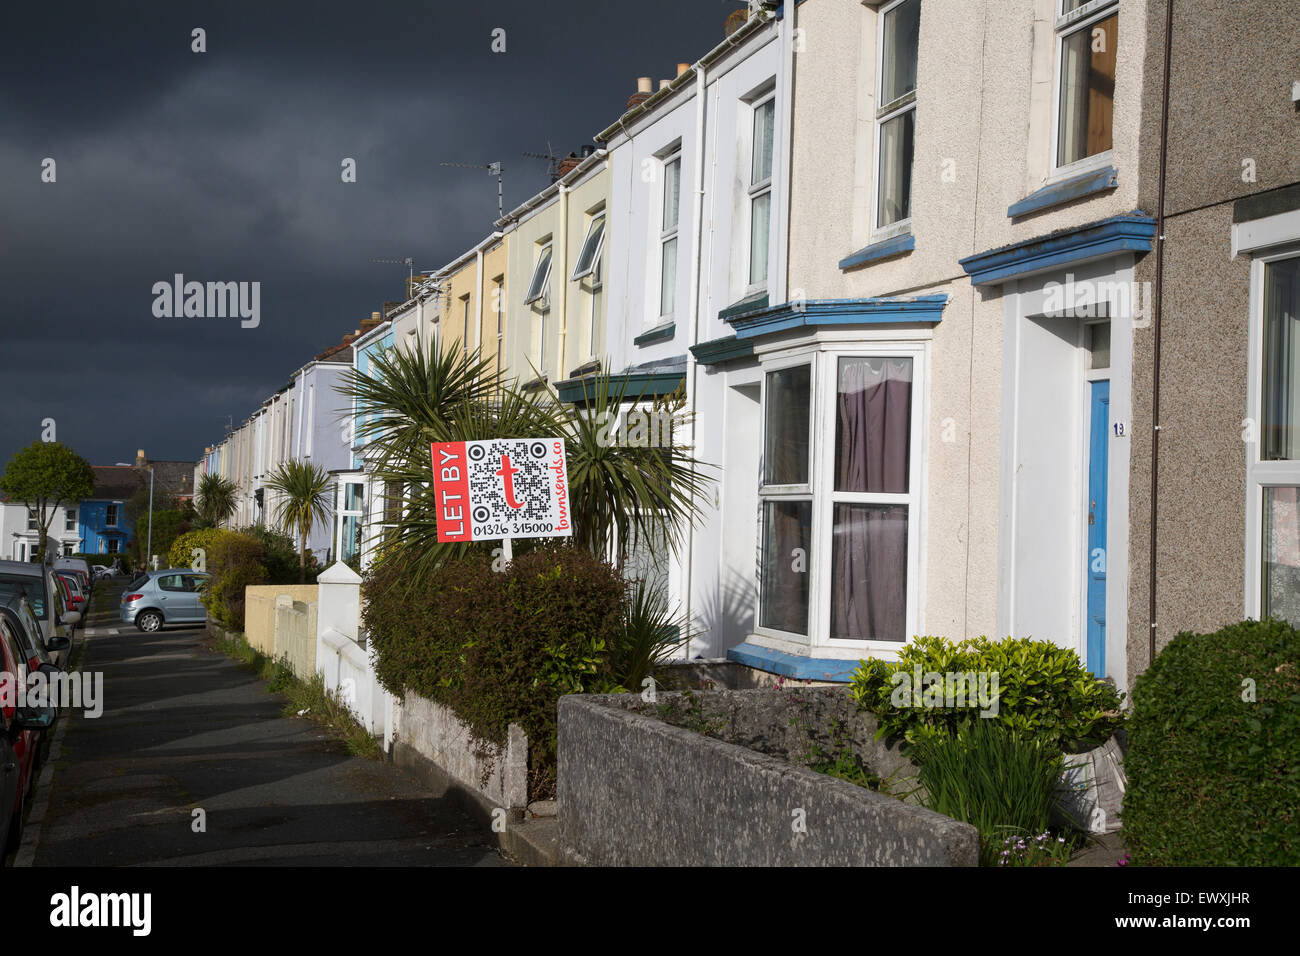 Terraced housing with letting signs  in Falmouth, Cornwall, England, UK with storm clouds overhead Stock Photo